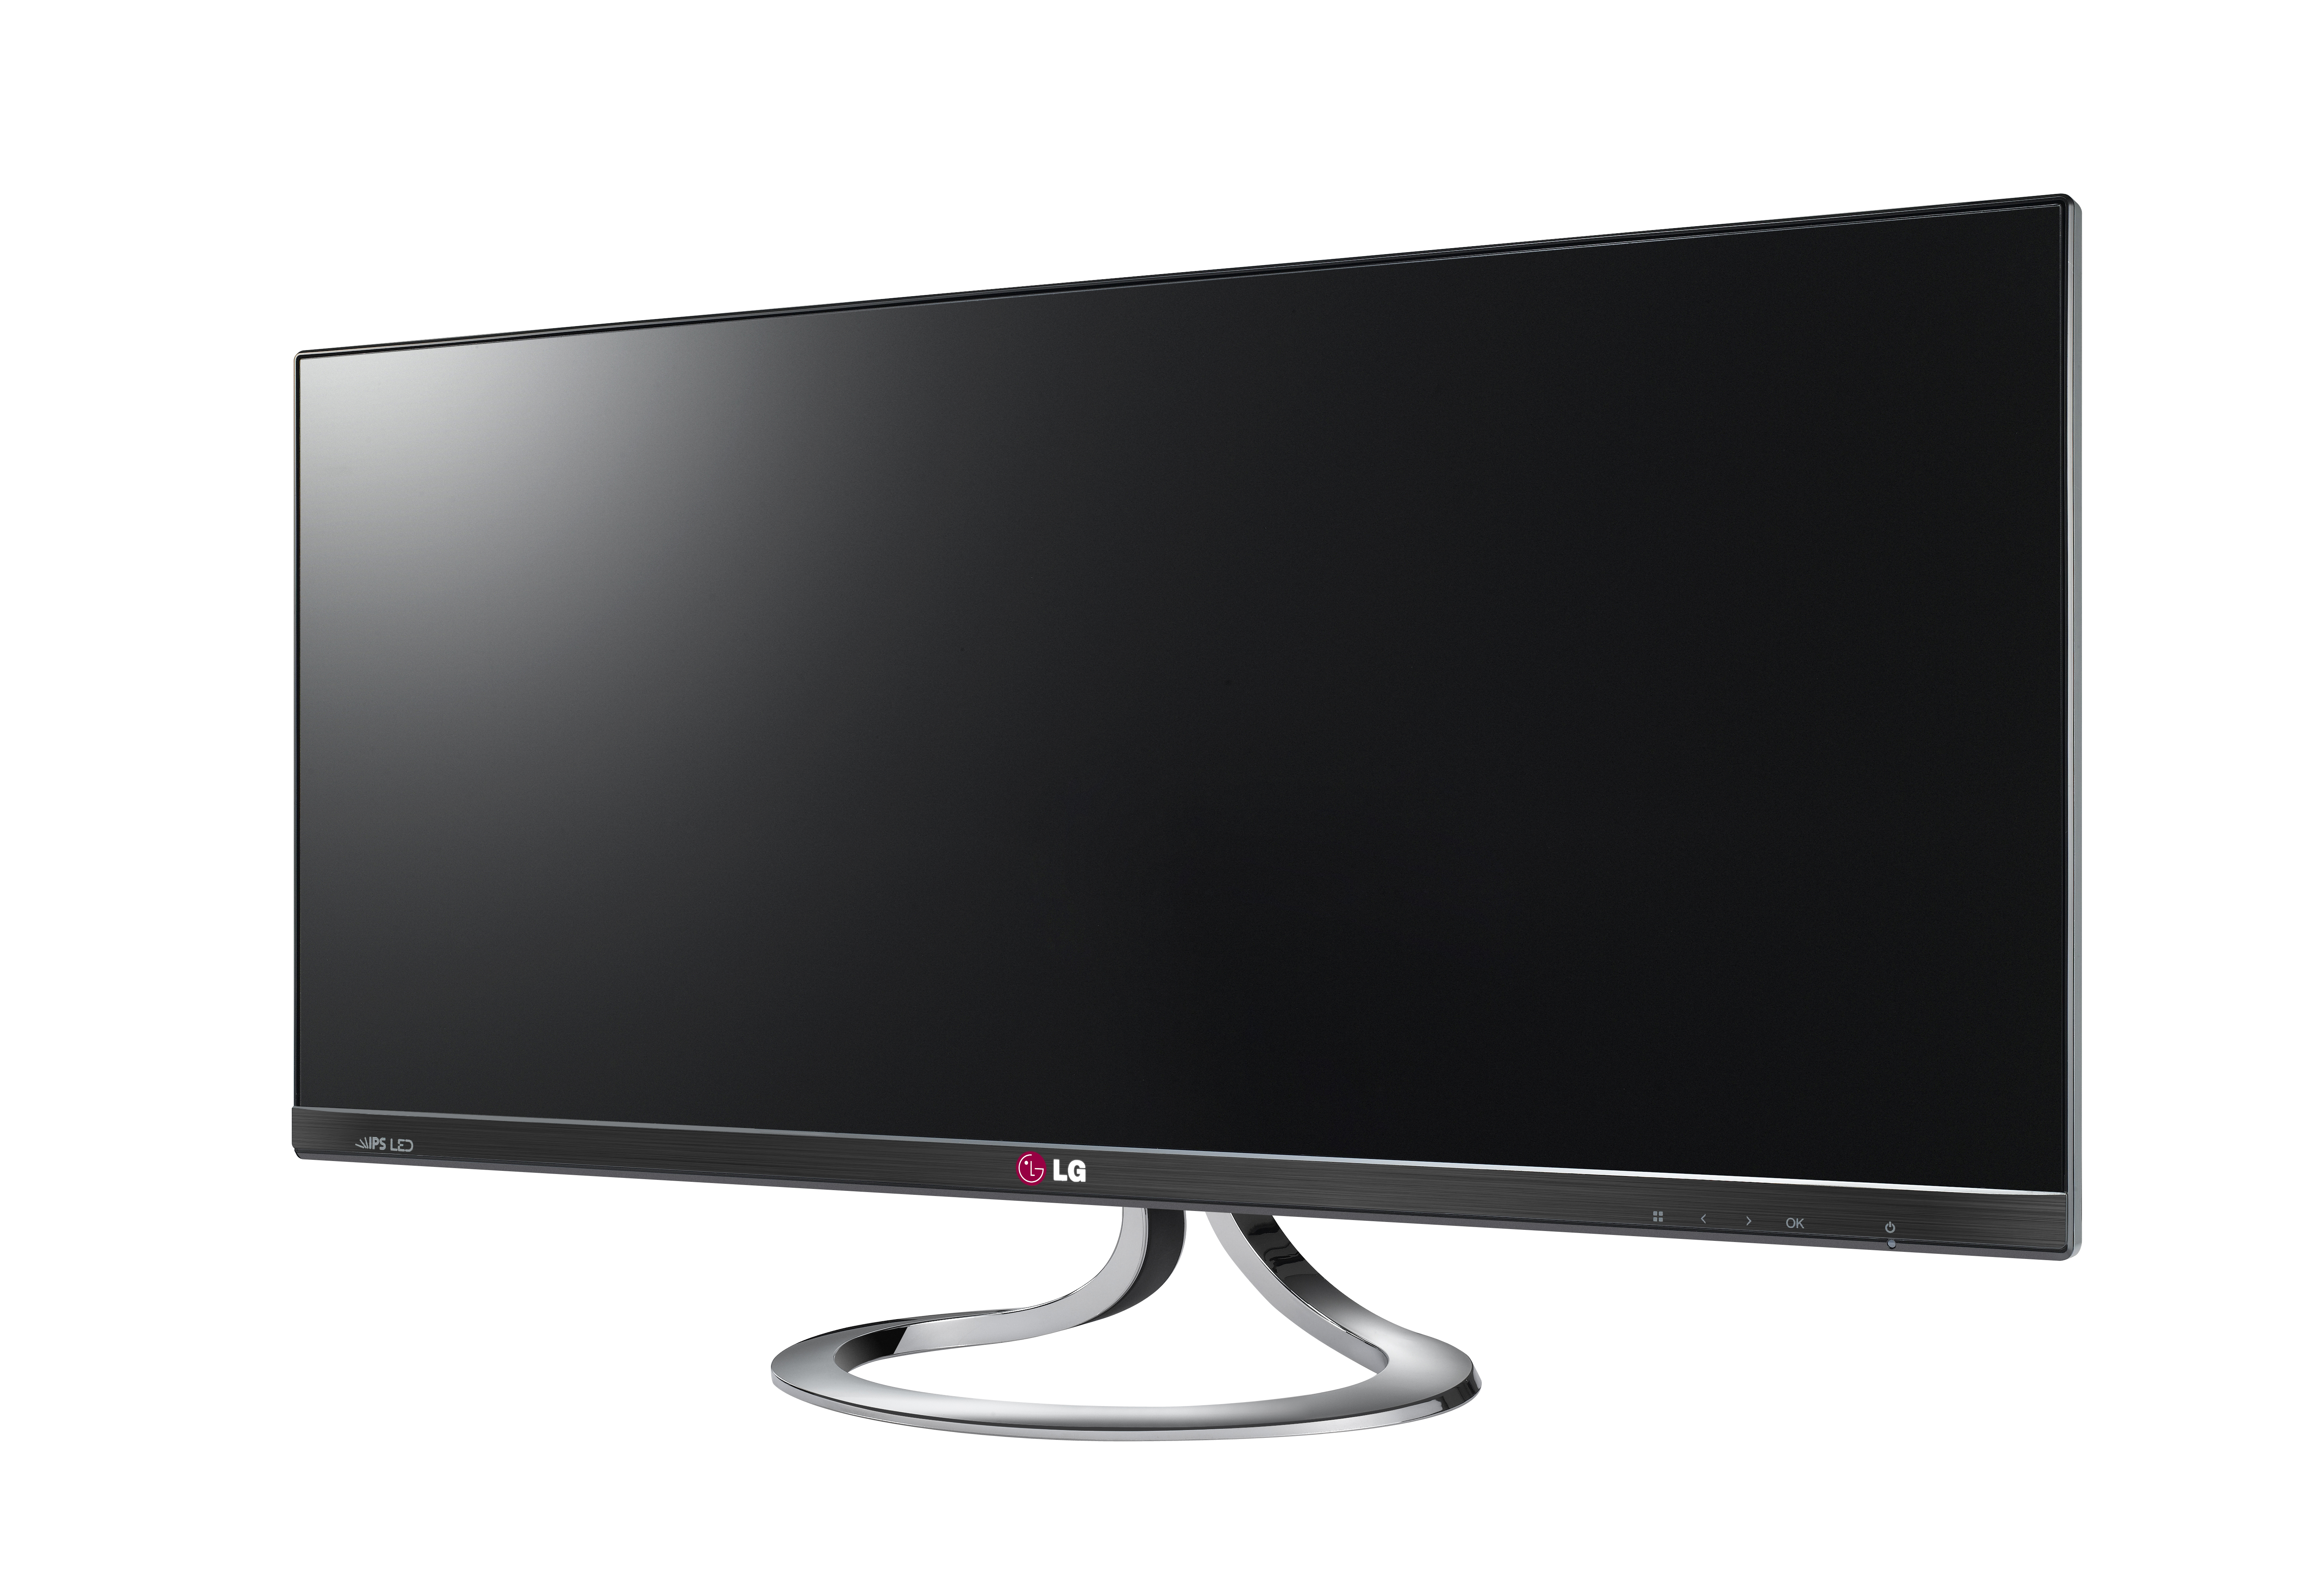 A right-side view of LG UltraWide monitor model EA93